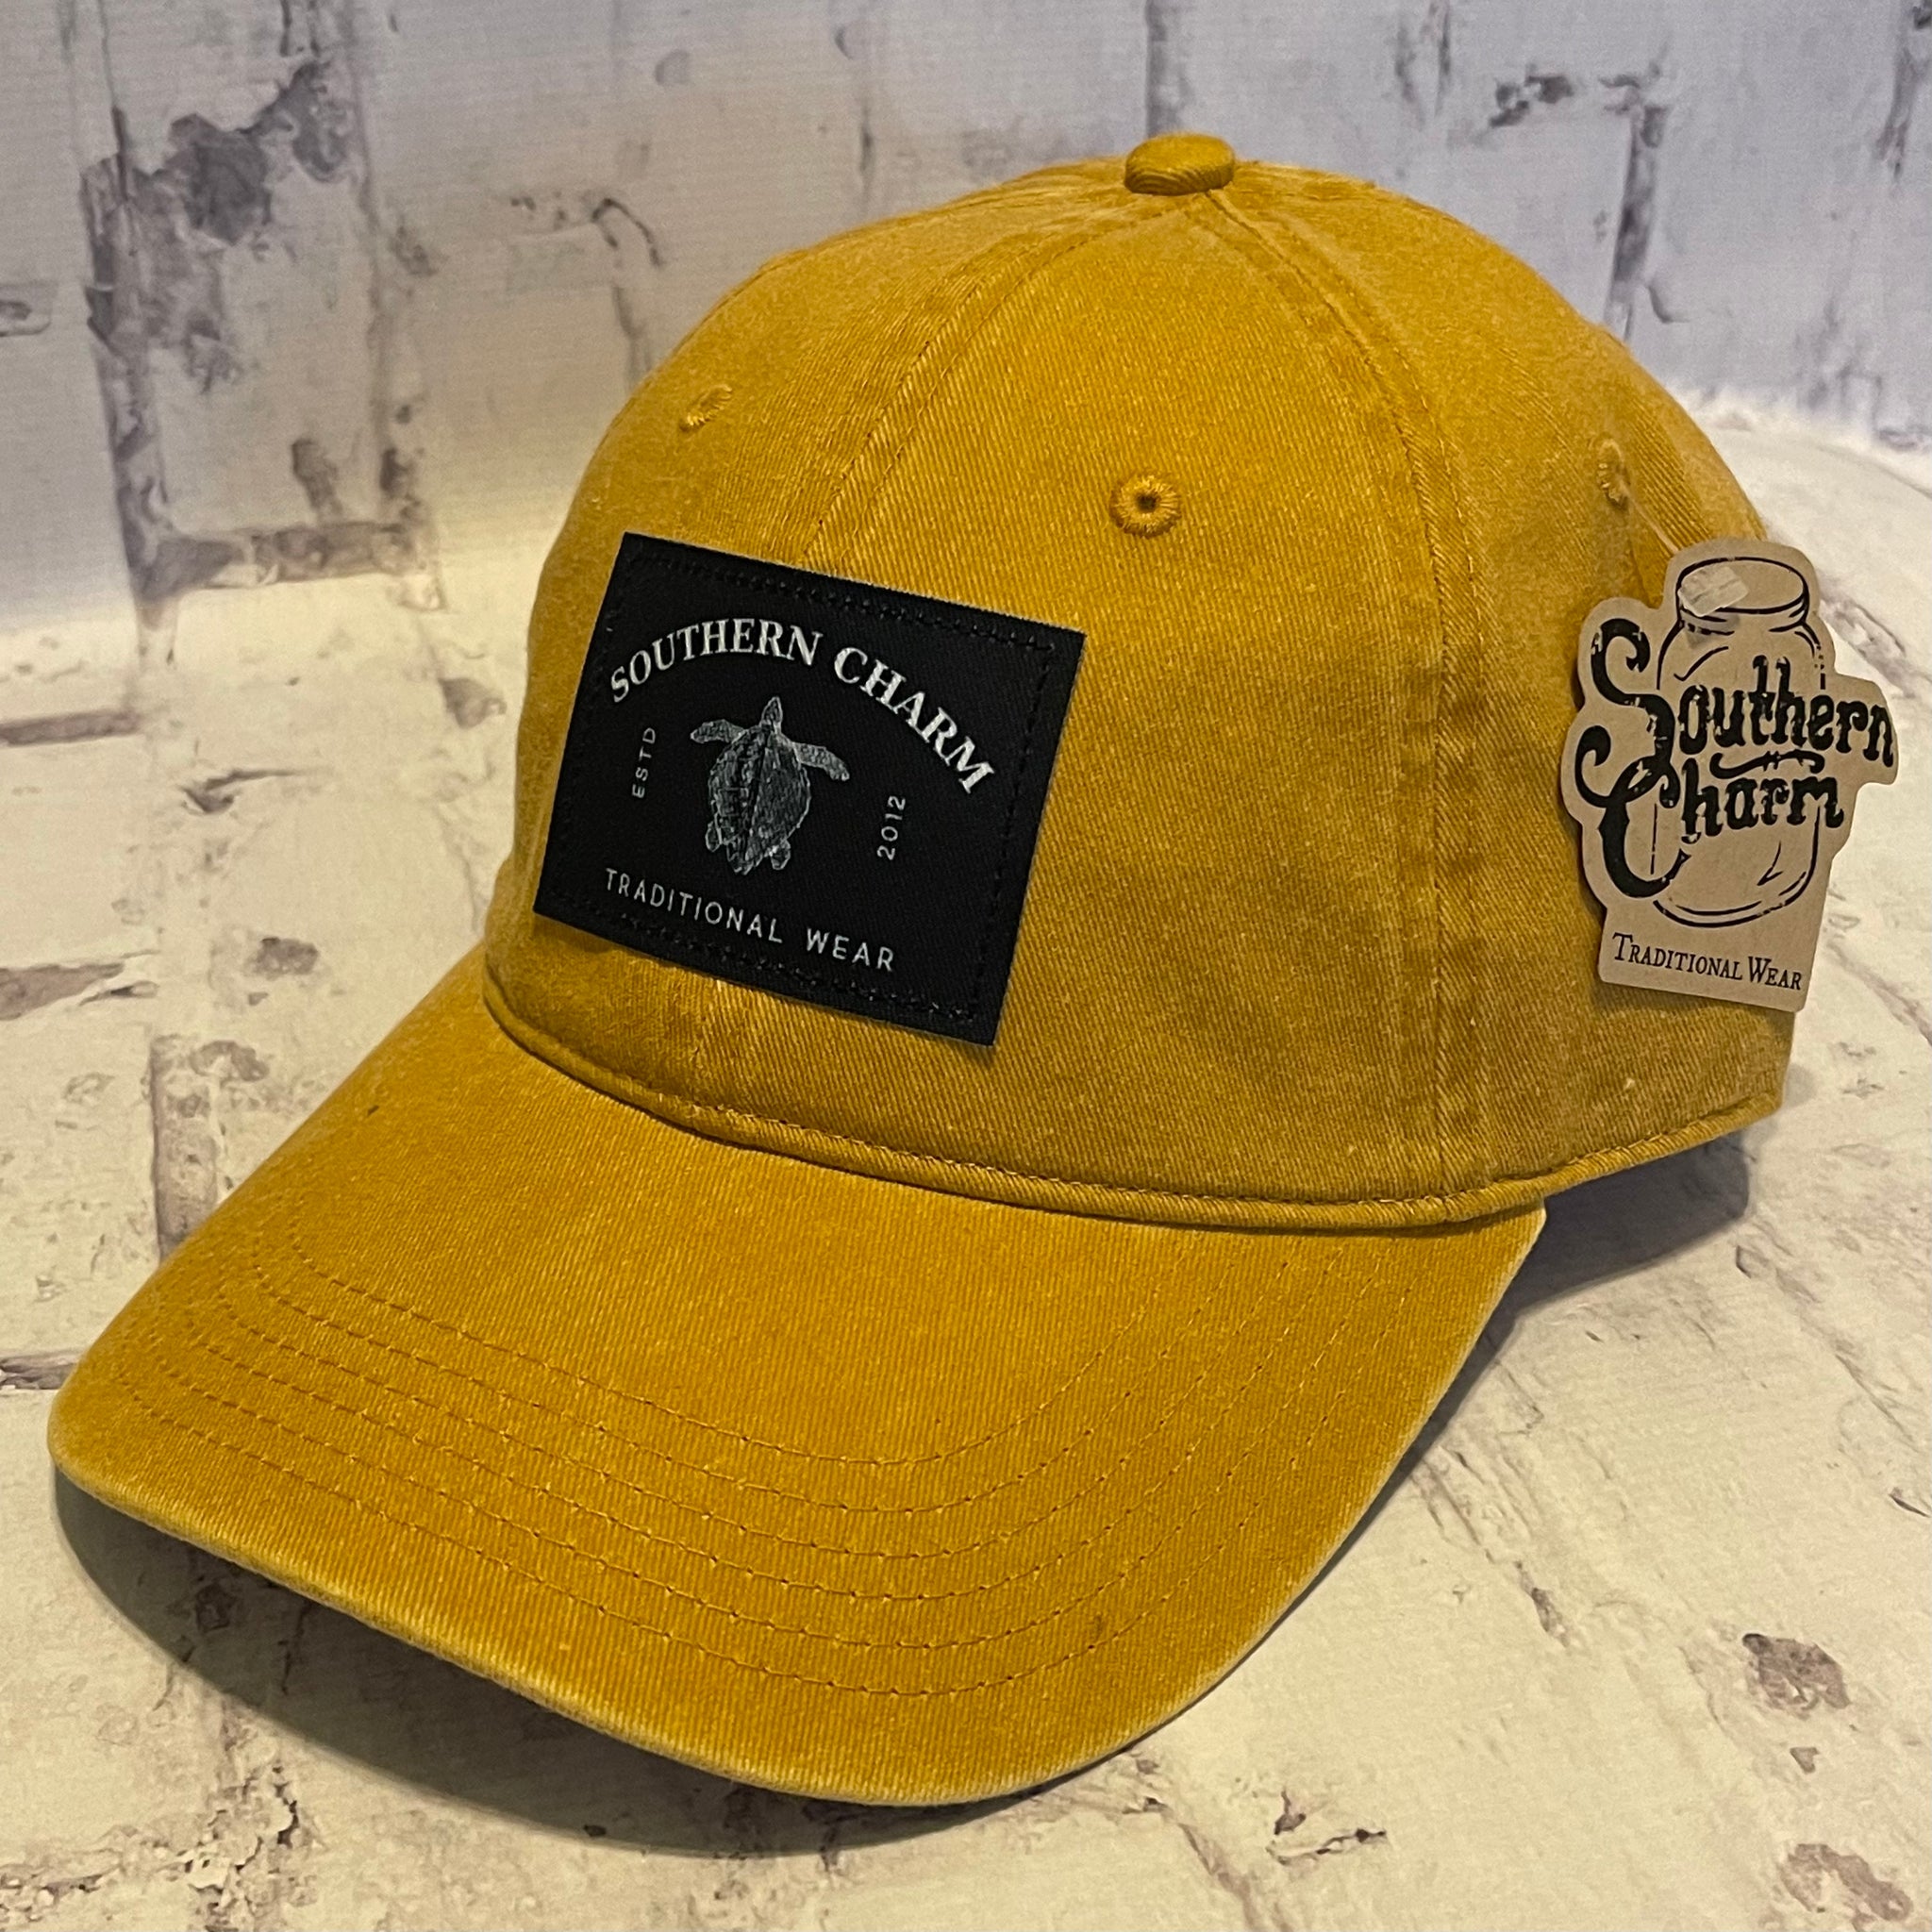 Southern Charm "Turtle Label" Hat - Mustard with Woven Patch - Southern Charm "Shop The Charm"